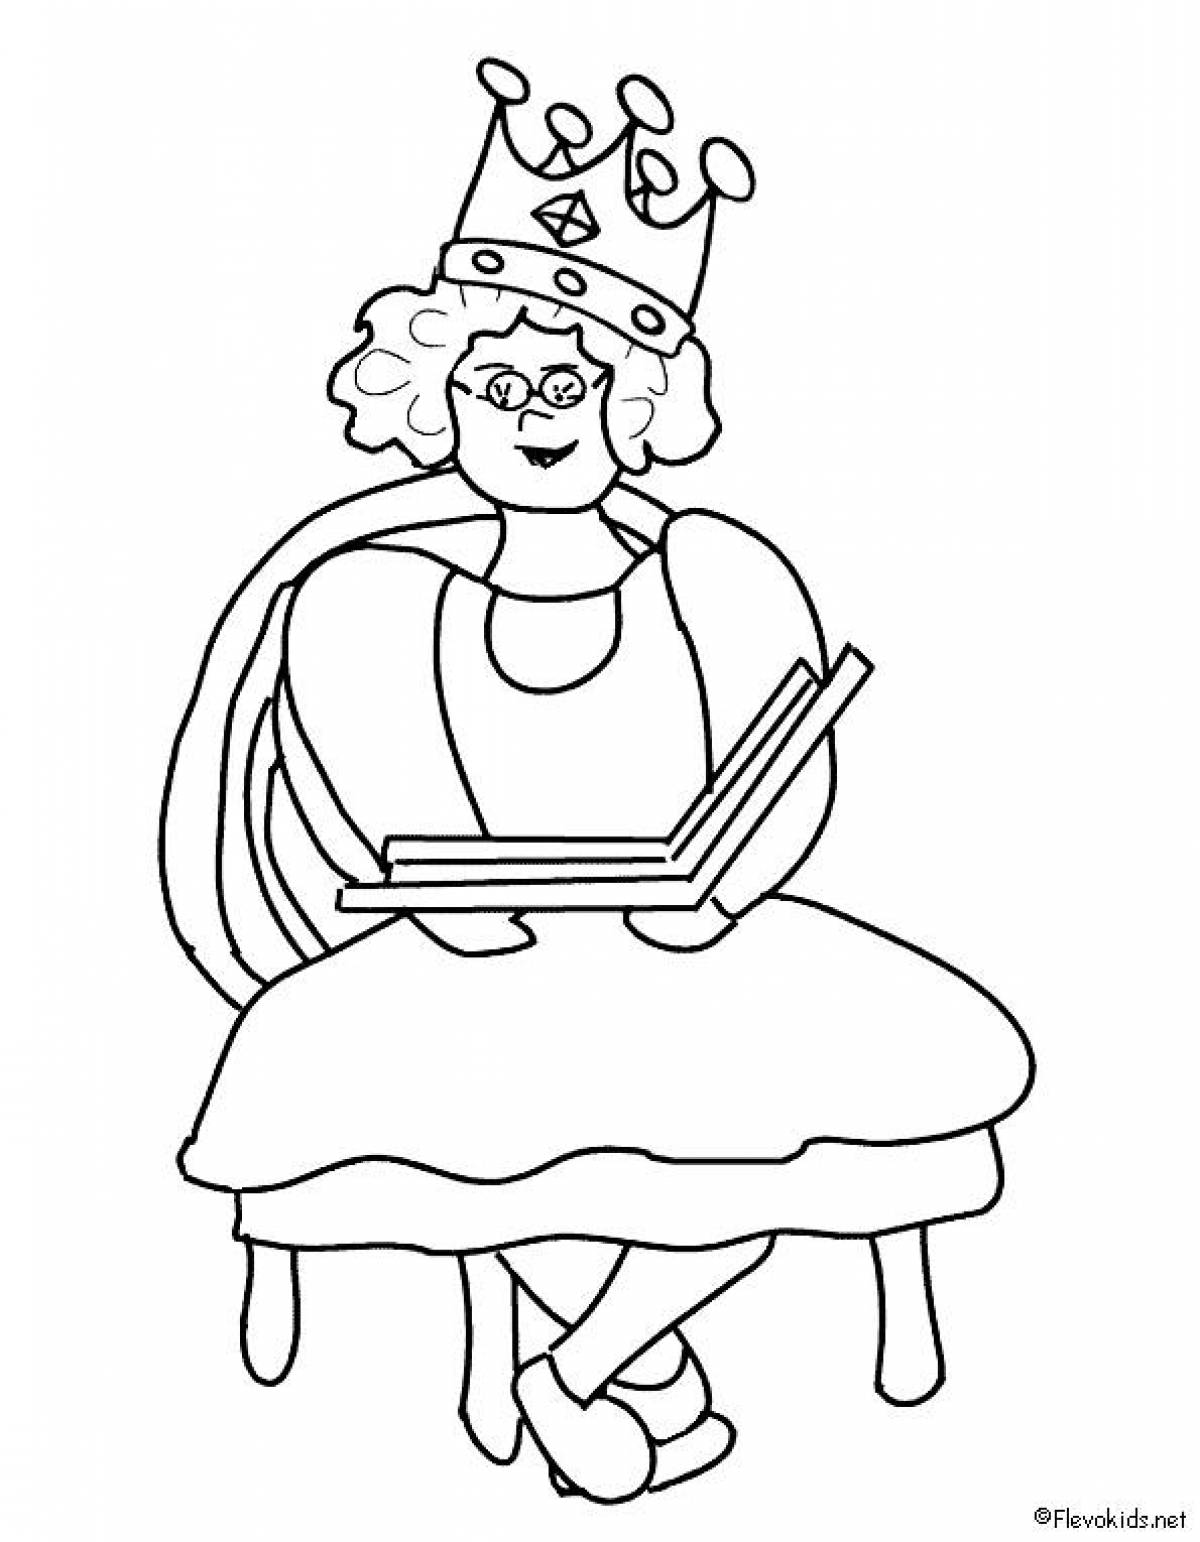 Attractive grandmother coloring book